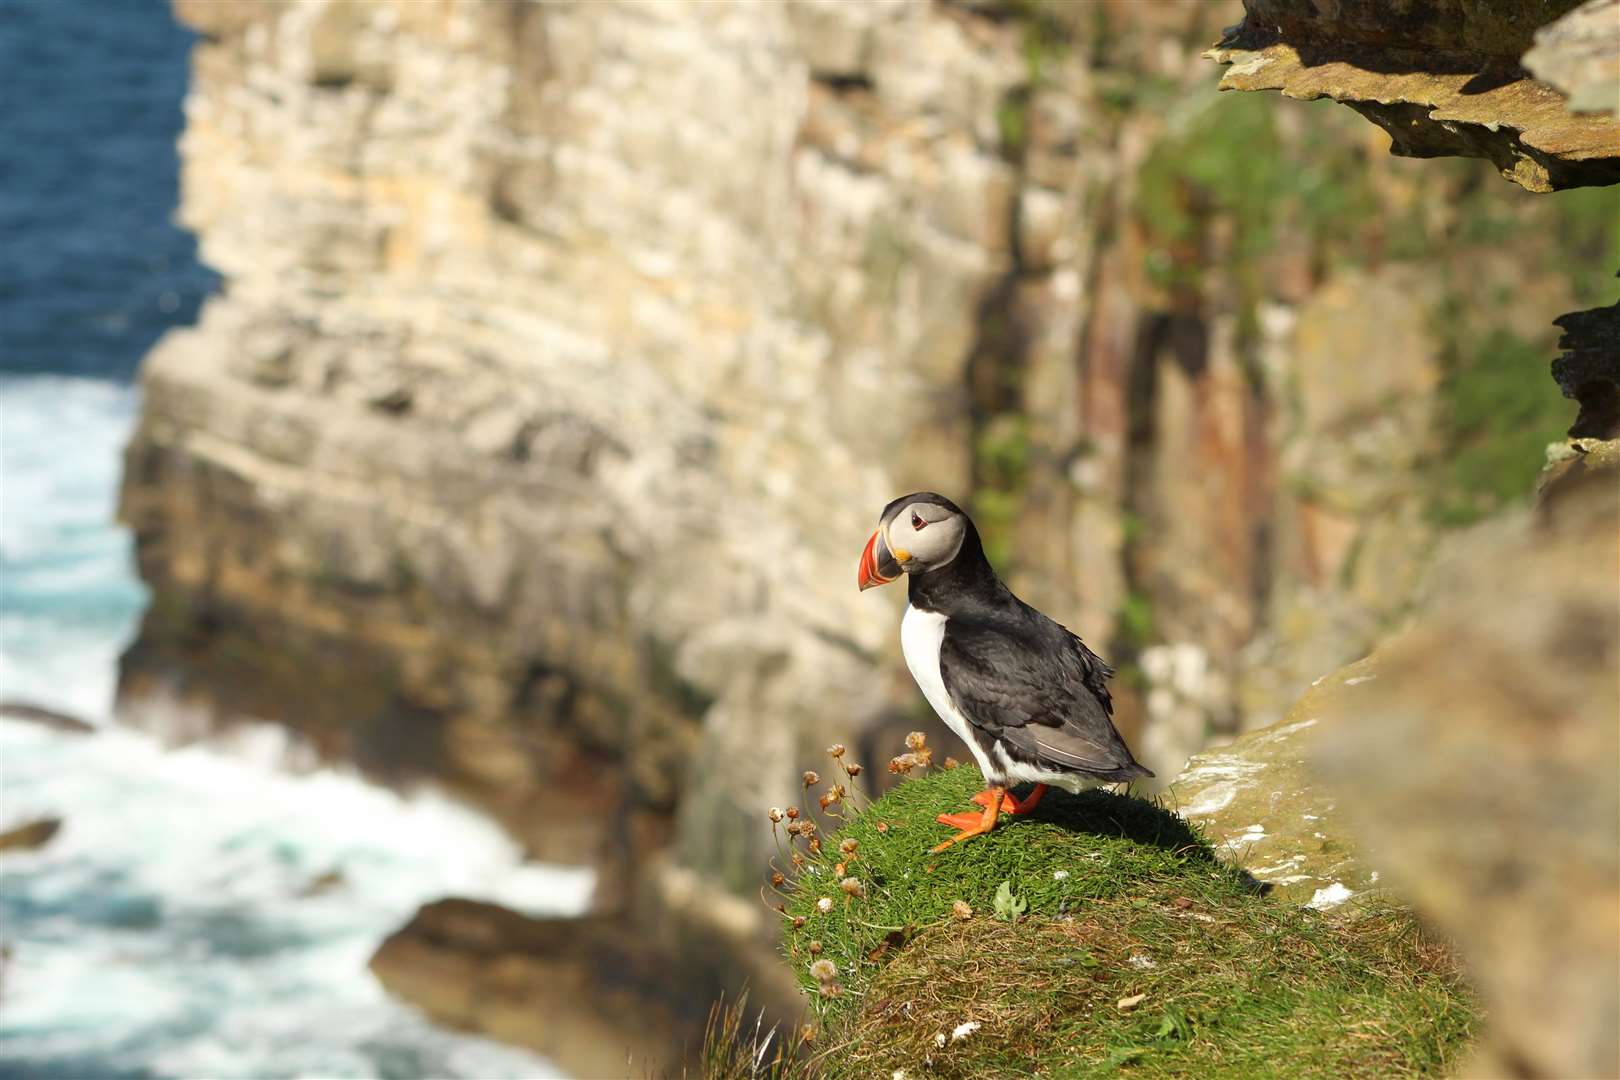 Puffin numbers in the North Caithness Cliffs SPA dropped by 55 per cent between 2000 and 2018. Picture: Alan Hendry